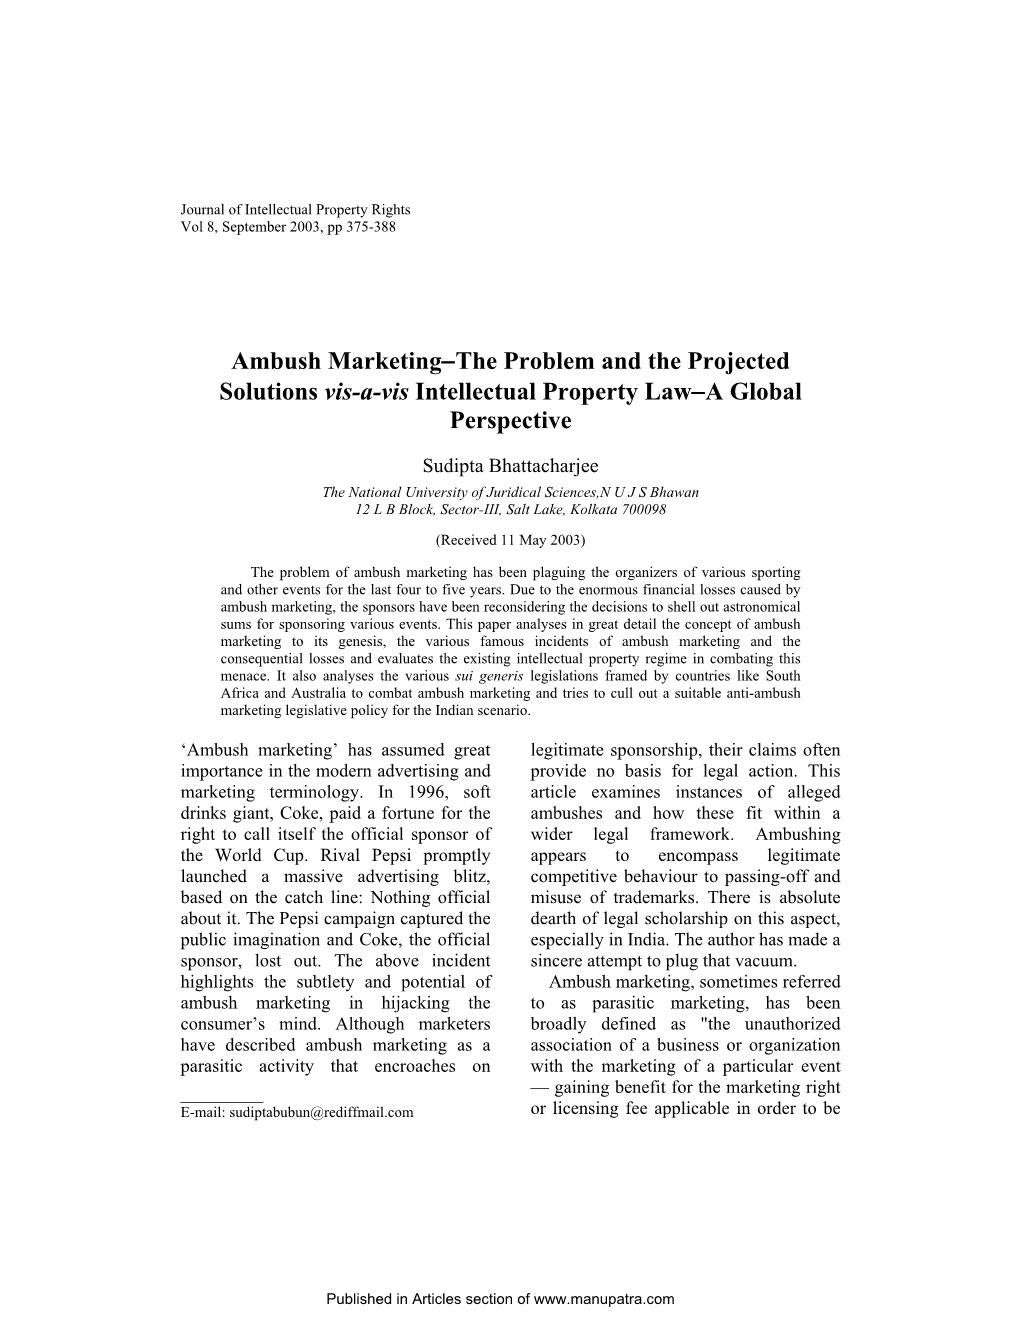 Ambush Marketing-The Problem and the Projected Solutions Vis-A-Vis